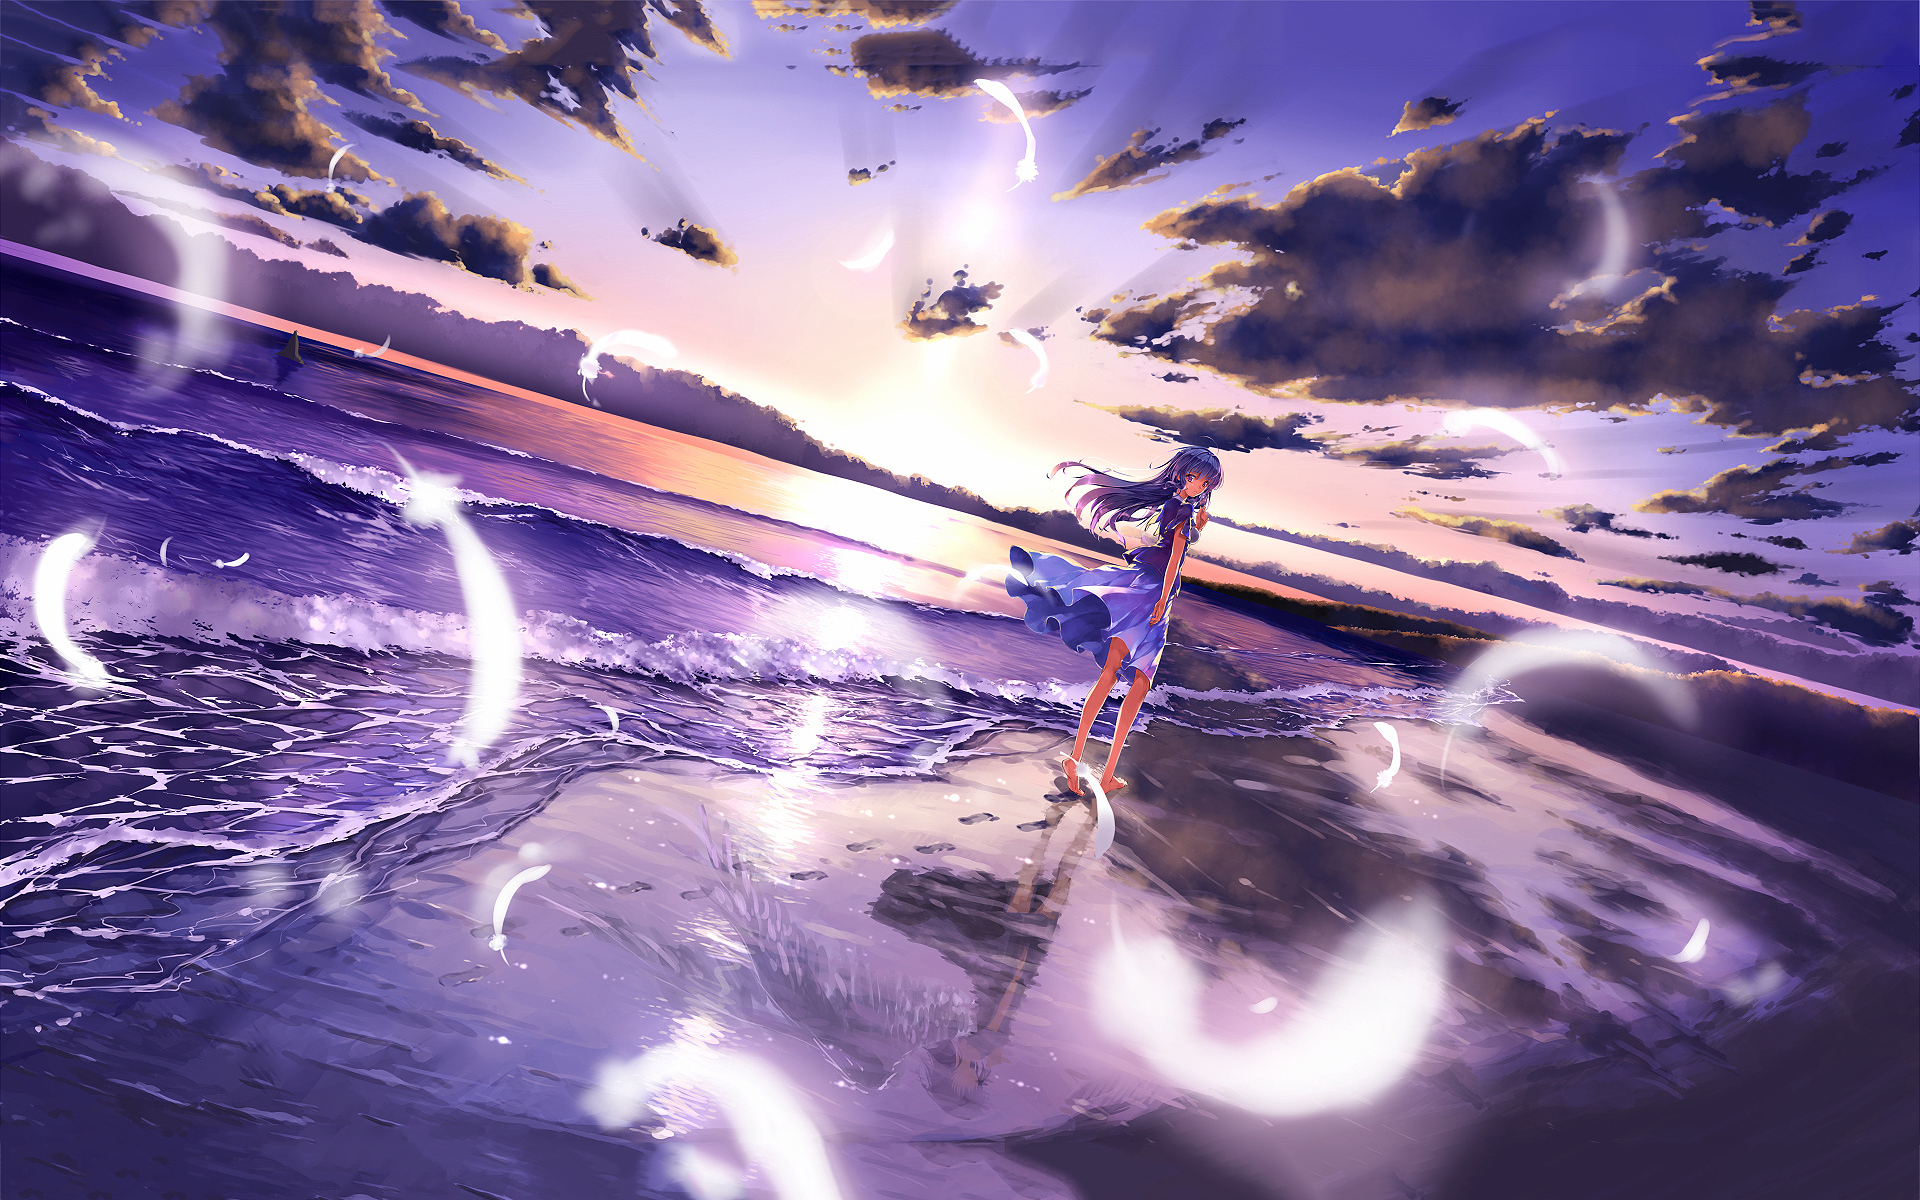 Beach Anime Backgrounds Images - Free Download on Freepik